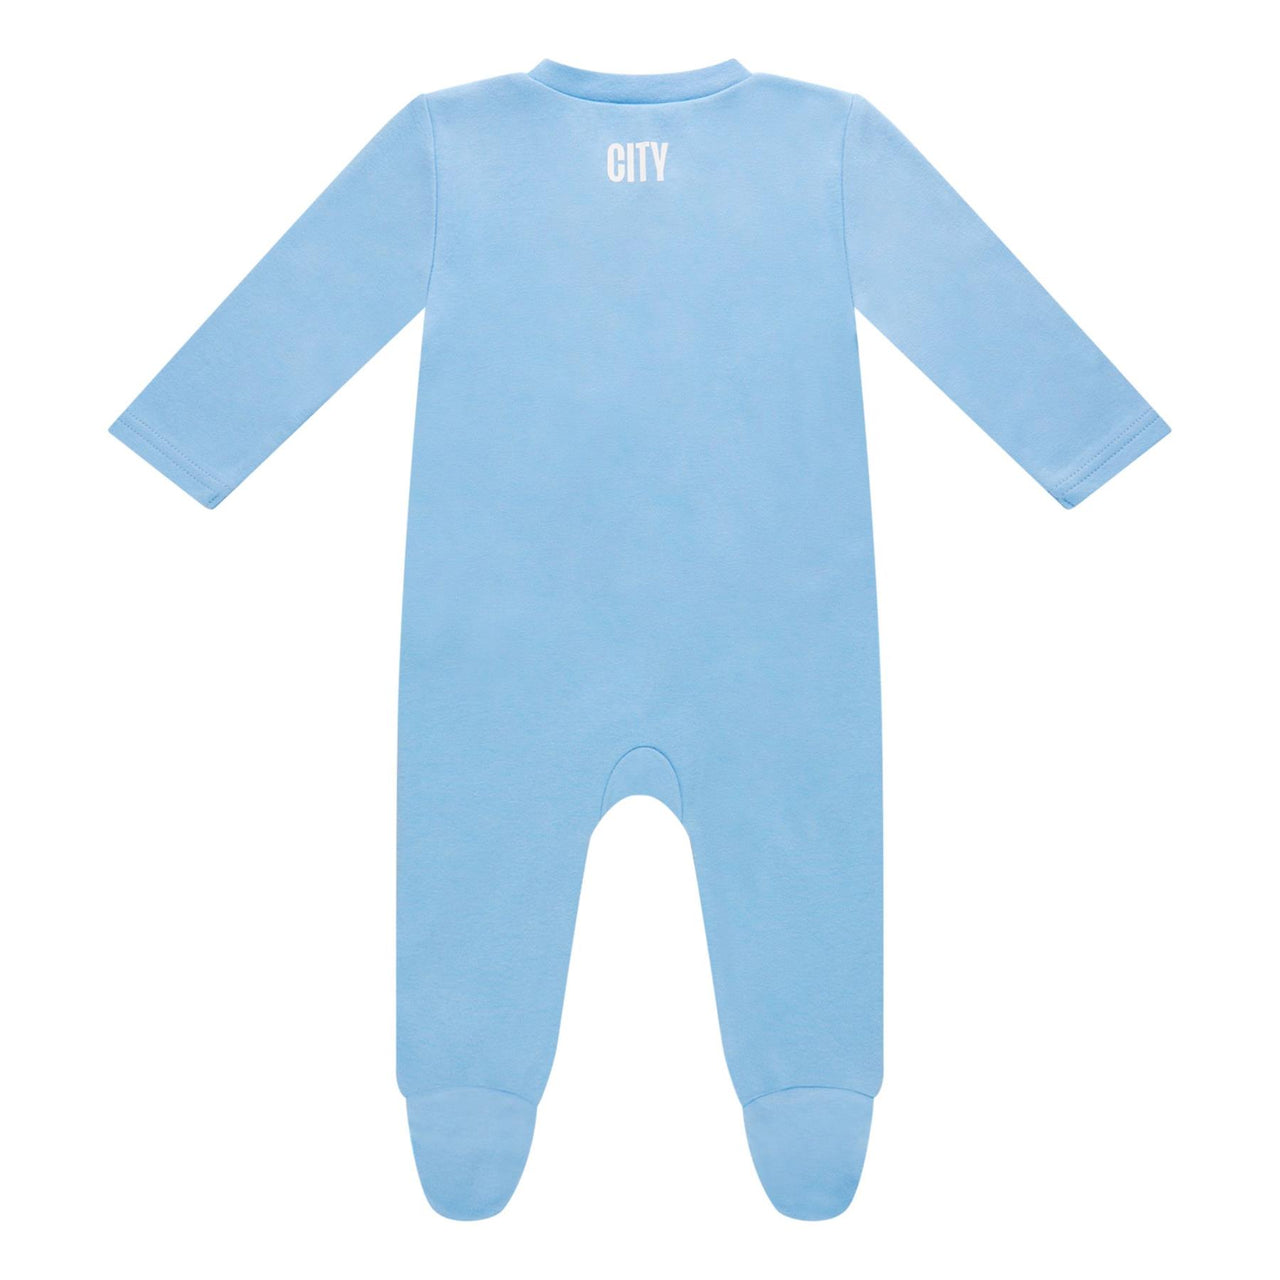 Manchester City FC Baby Kit Home Sleepsuit | 2023/24